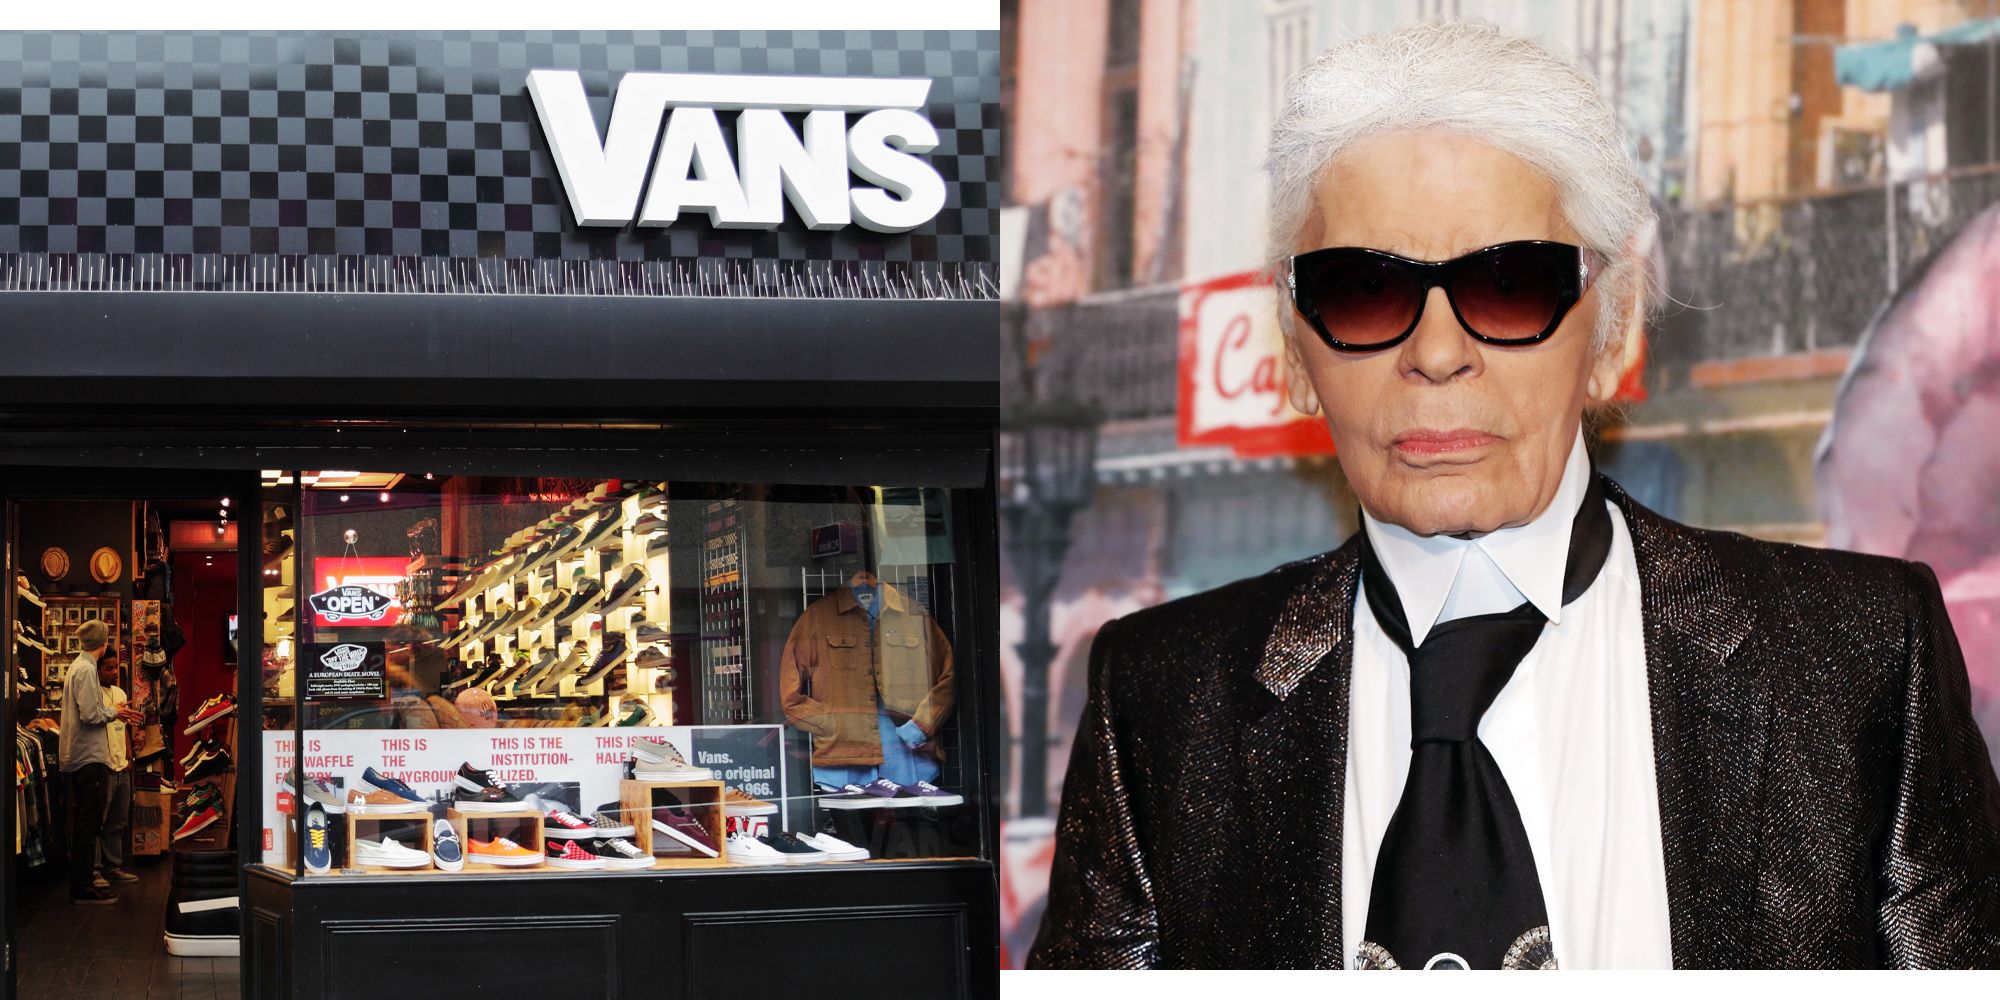 Samenstelling majoor Verbeteren Vans and Karl Lagerfeld Announce Partnership - Will These Be the Most  Stylish Vans Ever?